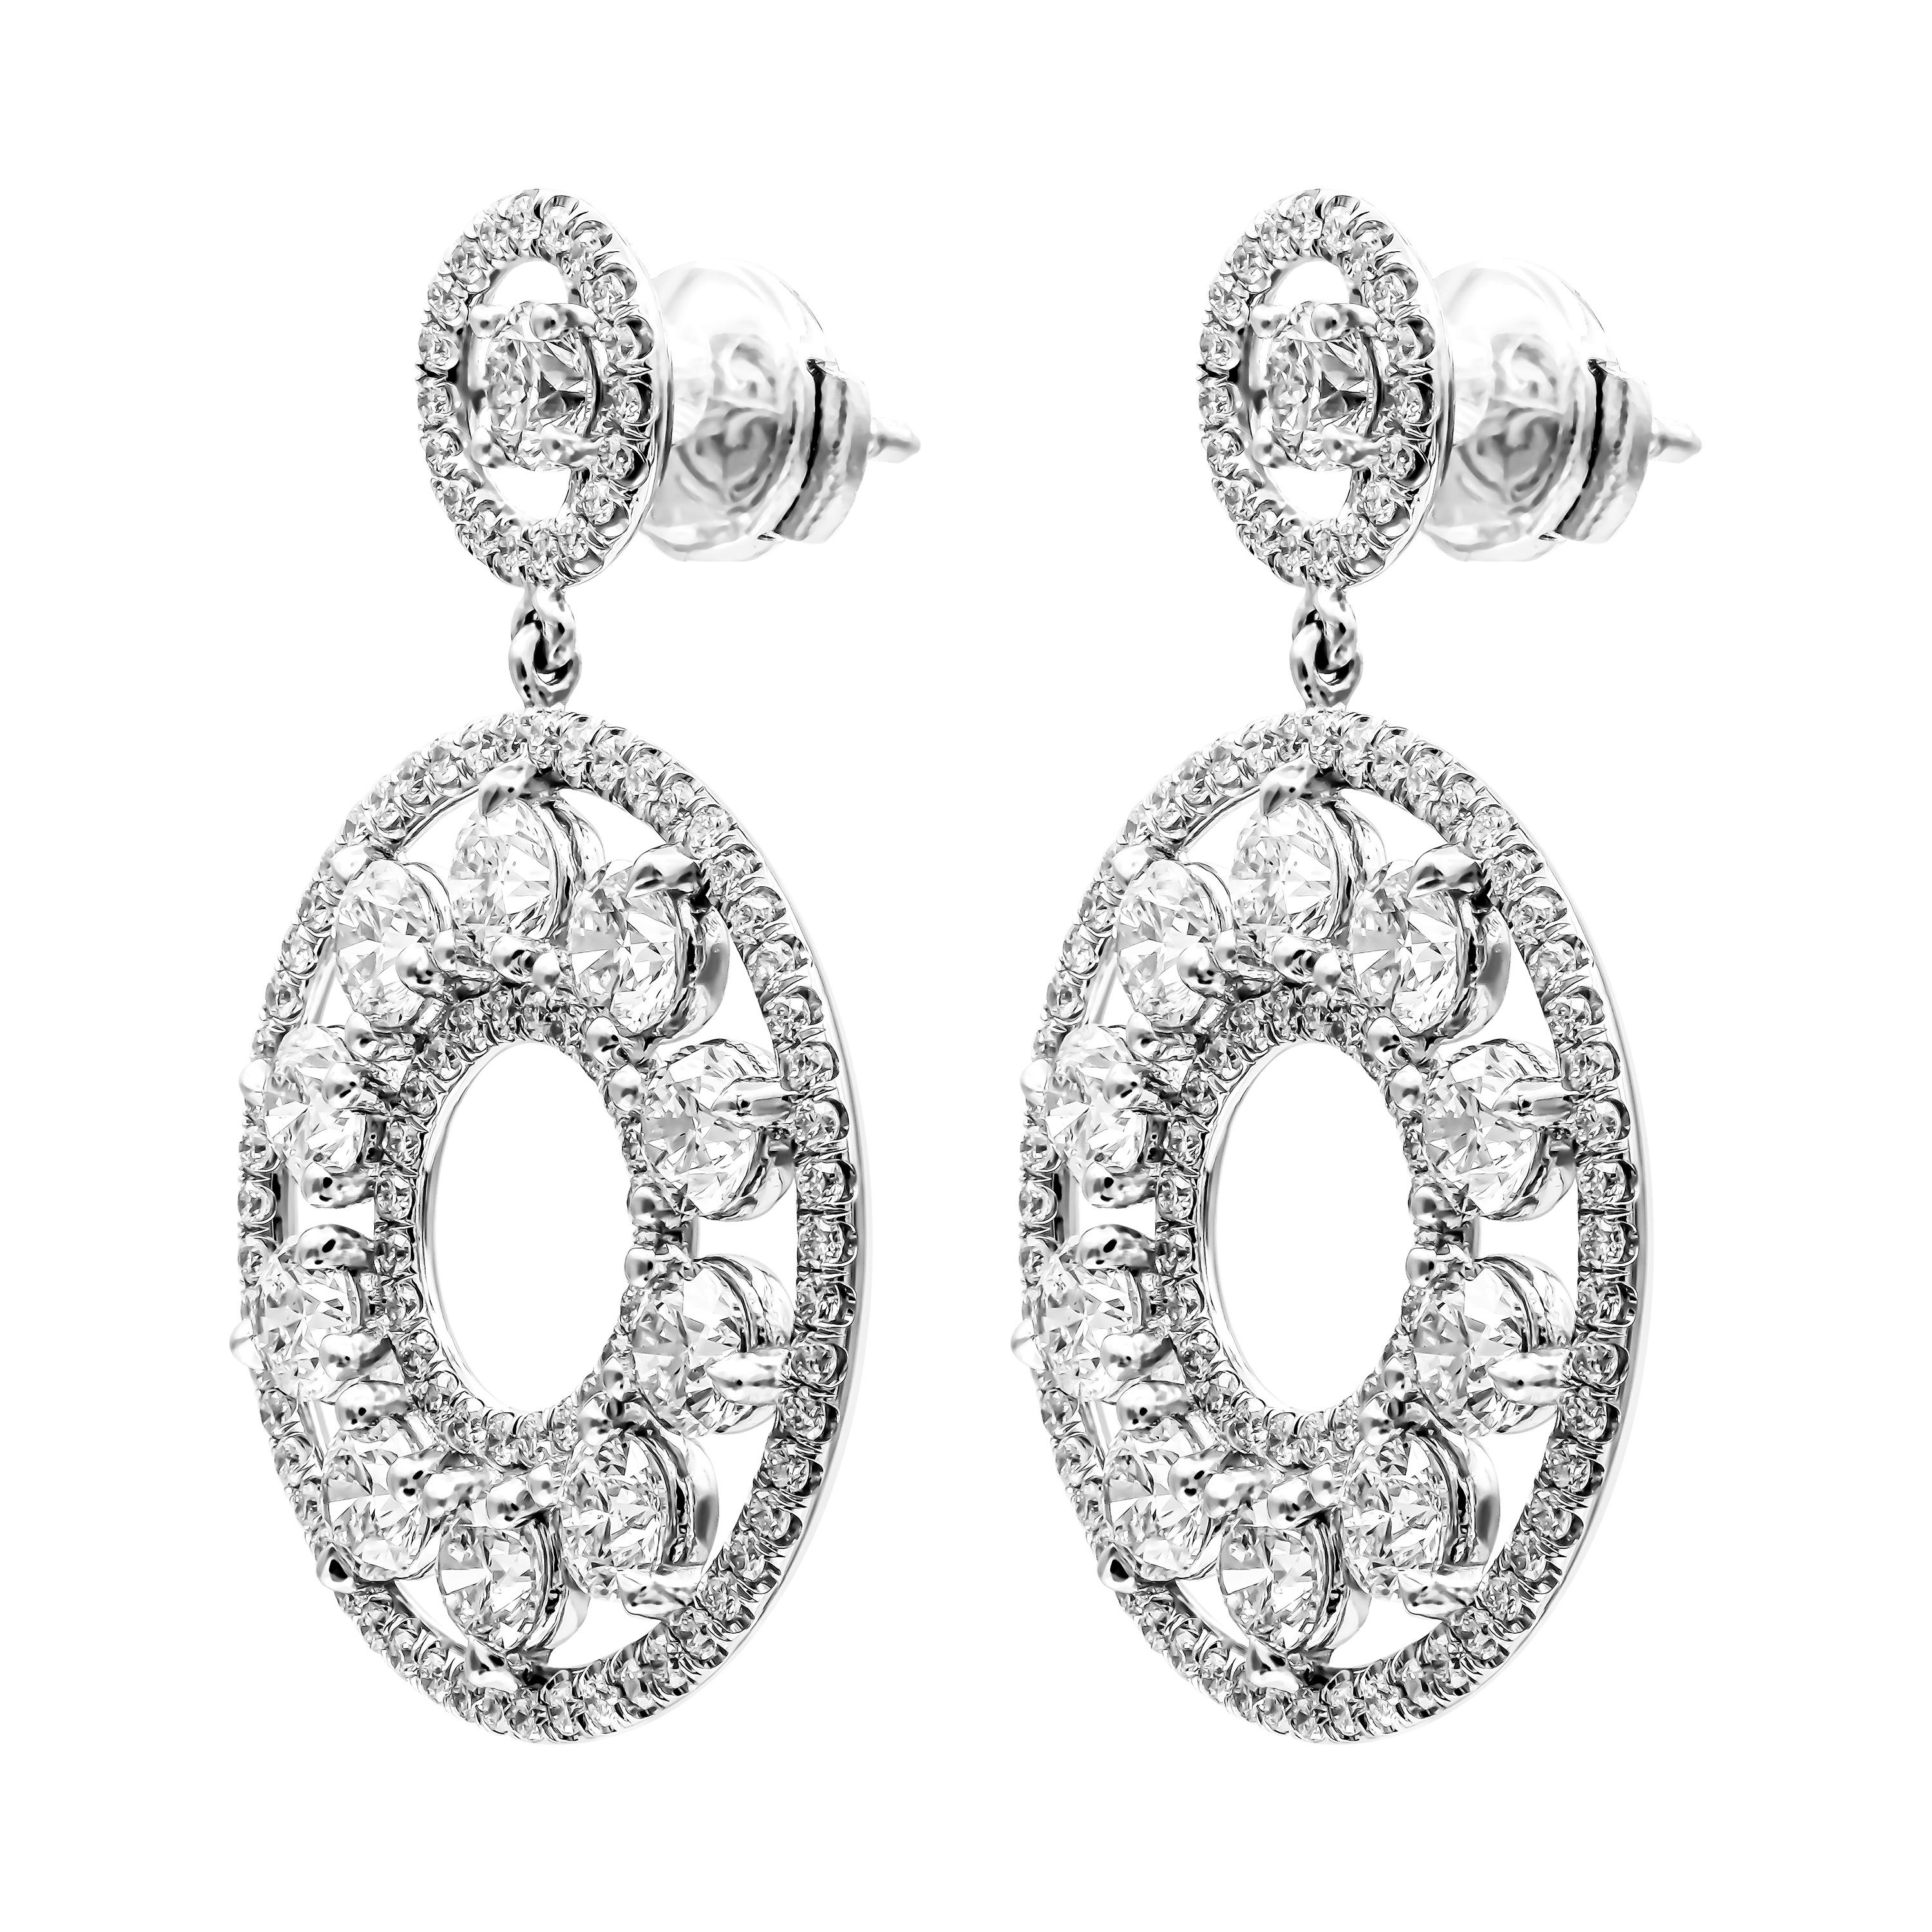 Unique and Elegant, one of a kind custom made Earrings that you won't see anywhere else!
Earring featuring 20 large full cut round brilliants on the bottom pave wire, and 2 on the top one, F-G color, VS clarity, totaling 5.12ct (both earrings), 4mm